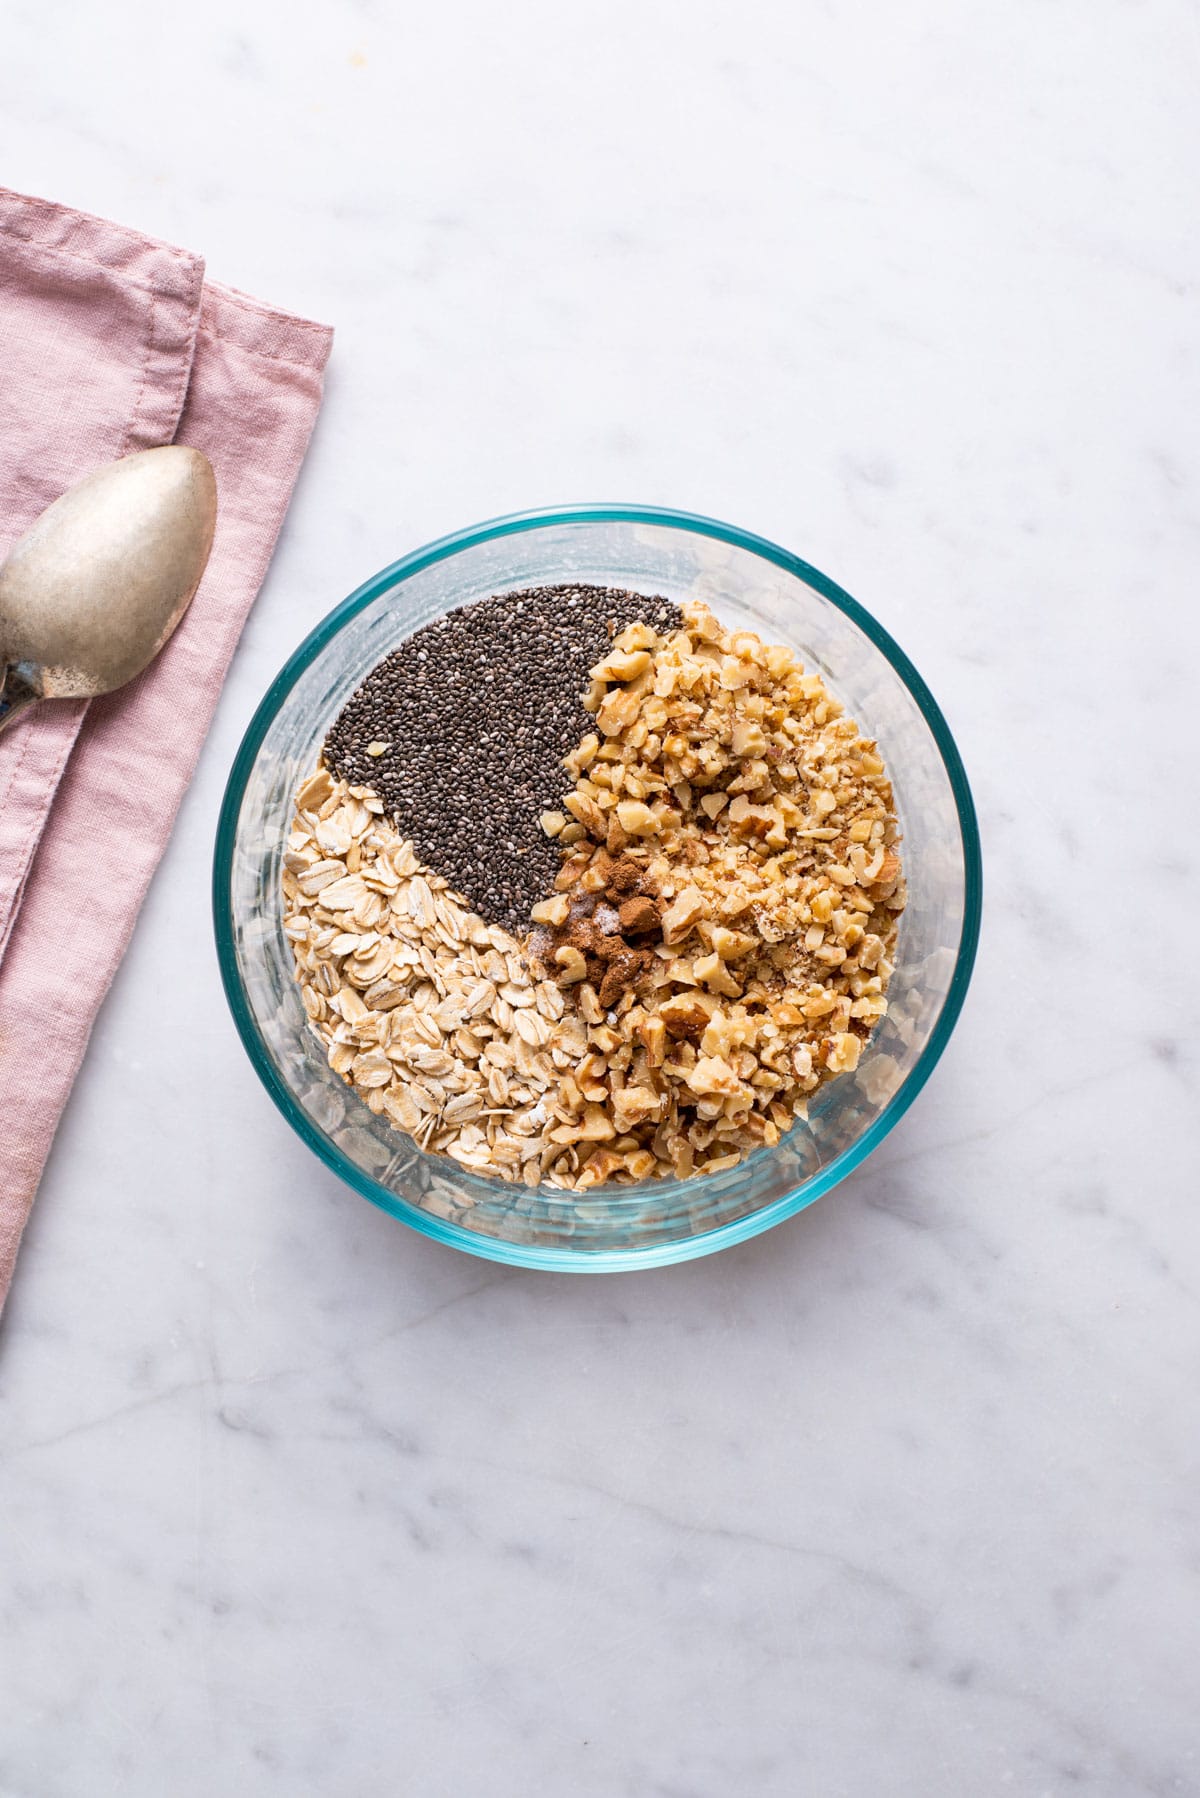 Ingredients combined in a bowl to make overnight oats with chia seeds.